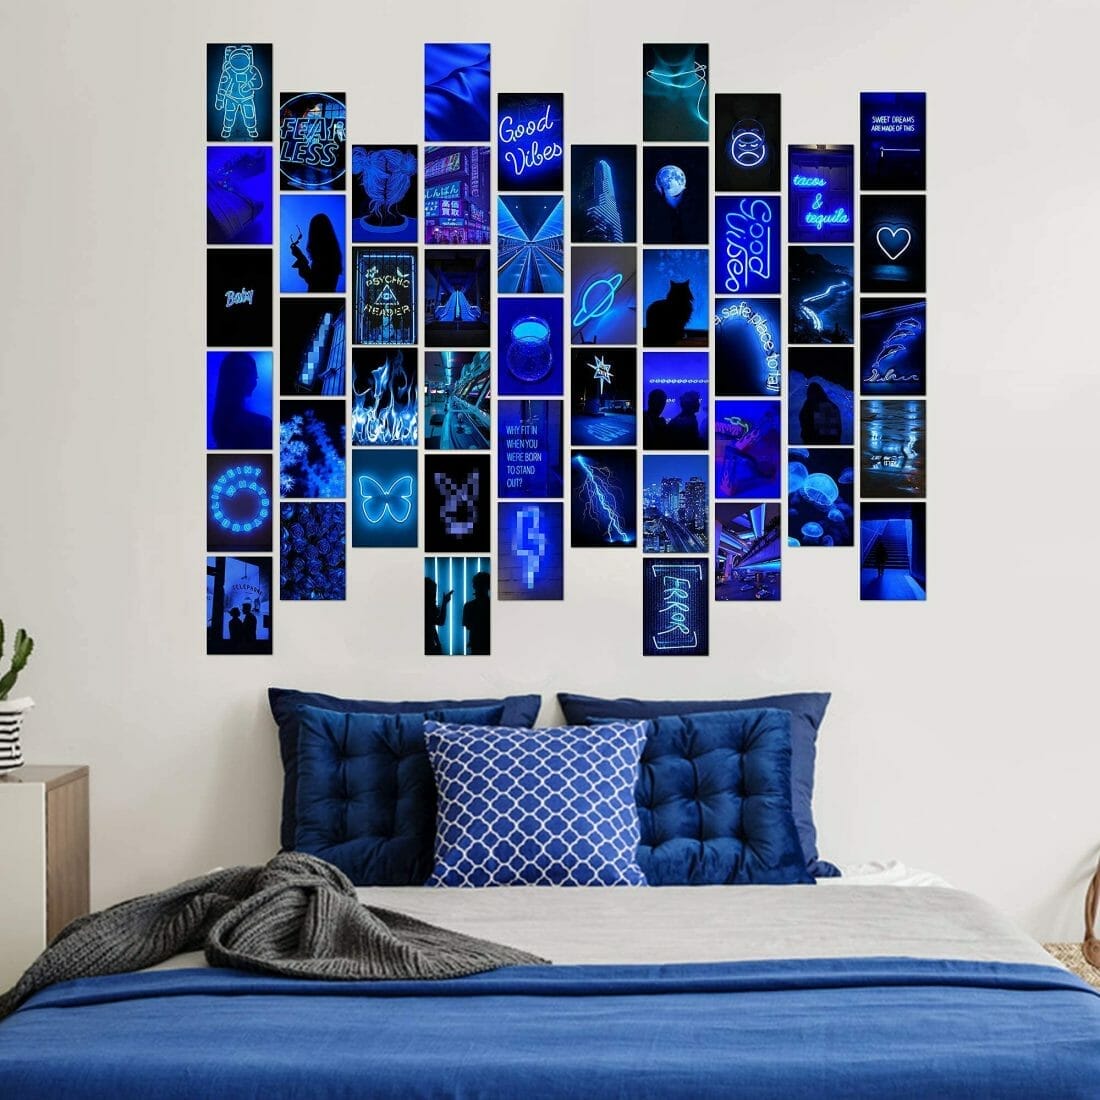 28 Fantastic Photo Collage Dorm Room Ideas You Can Emulate